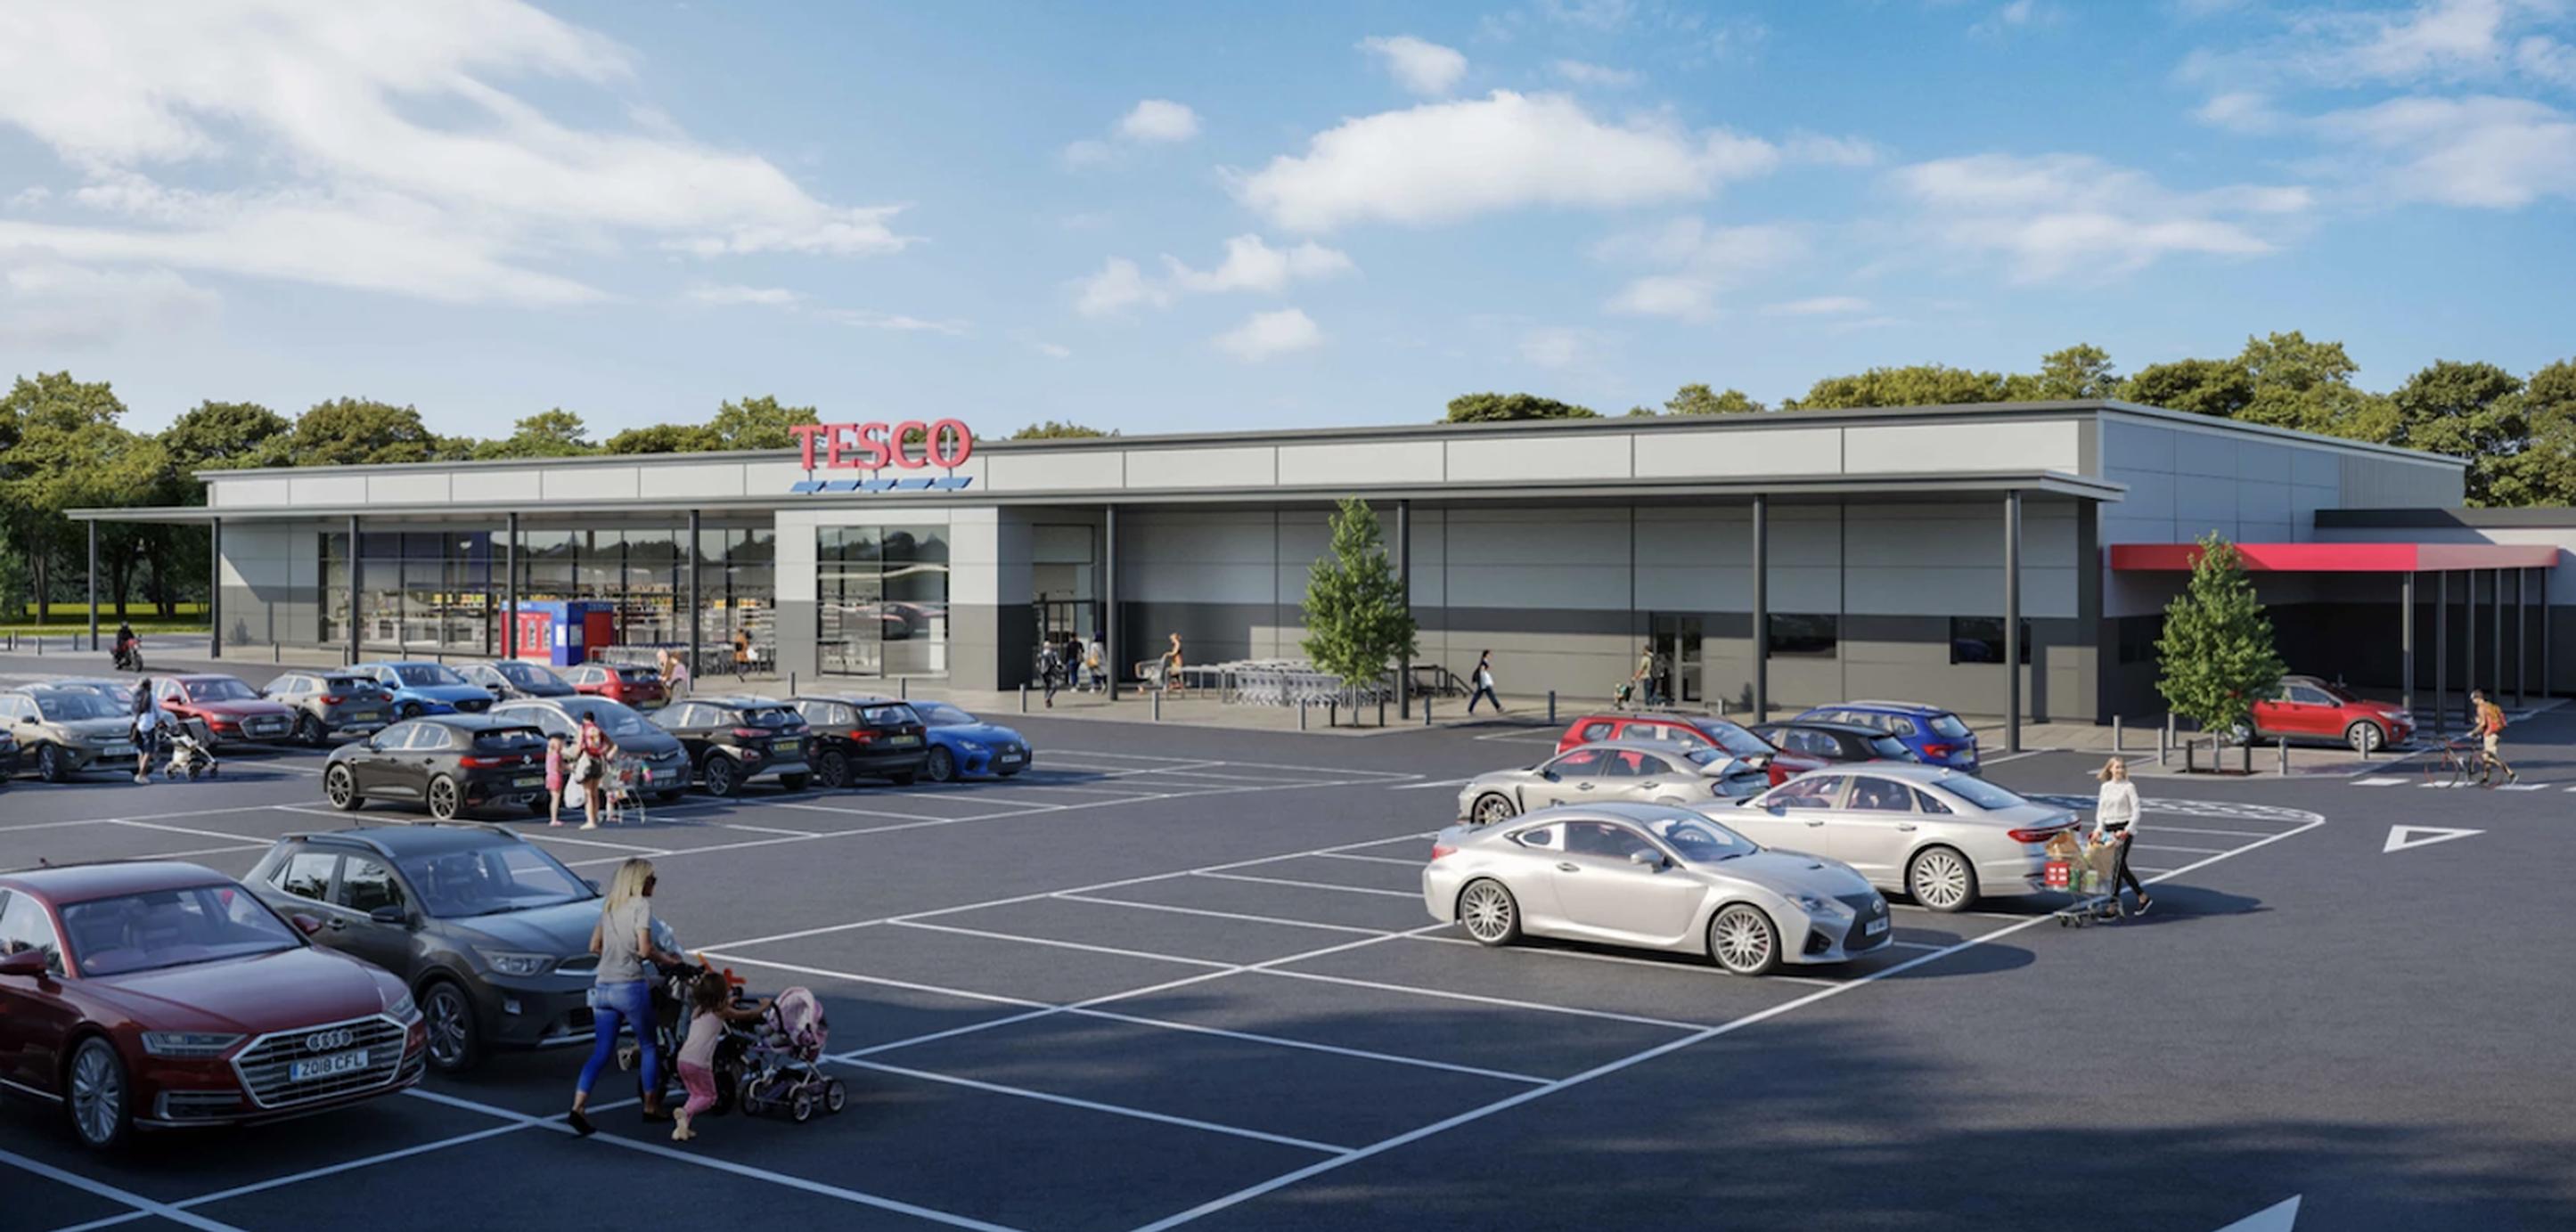 The planned Tesco store